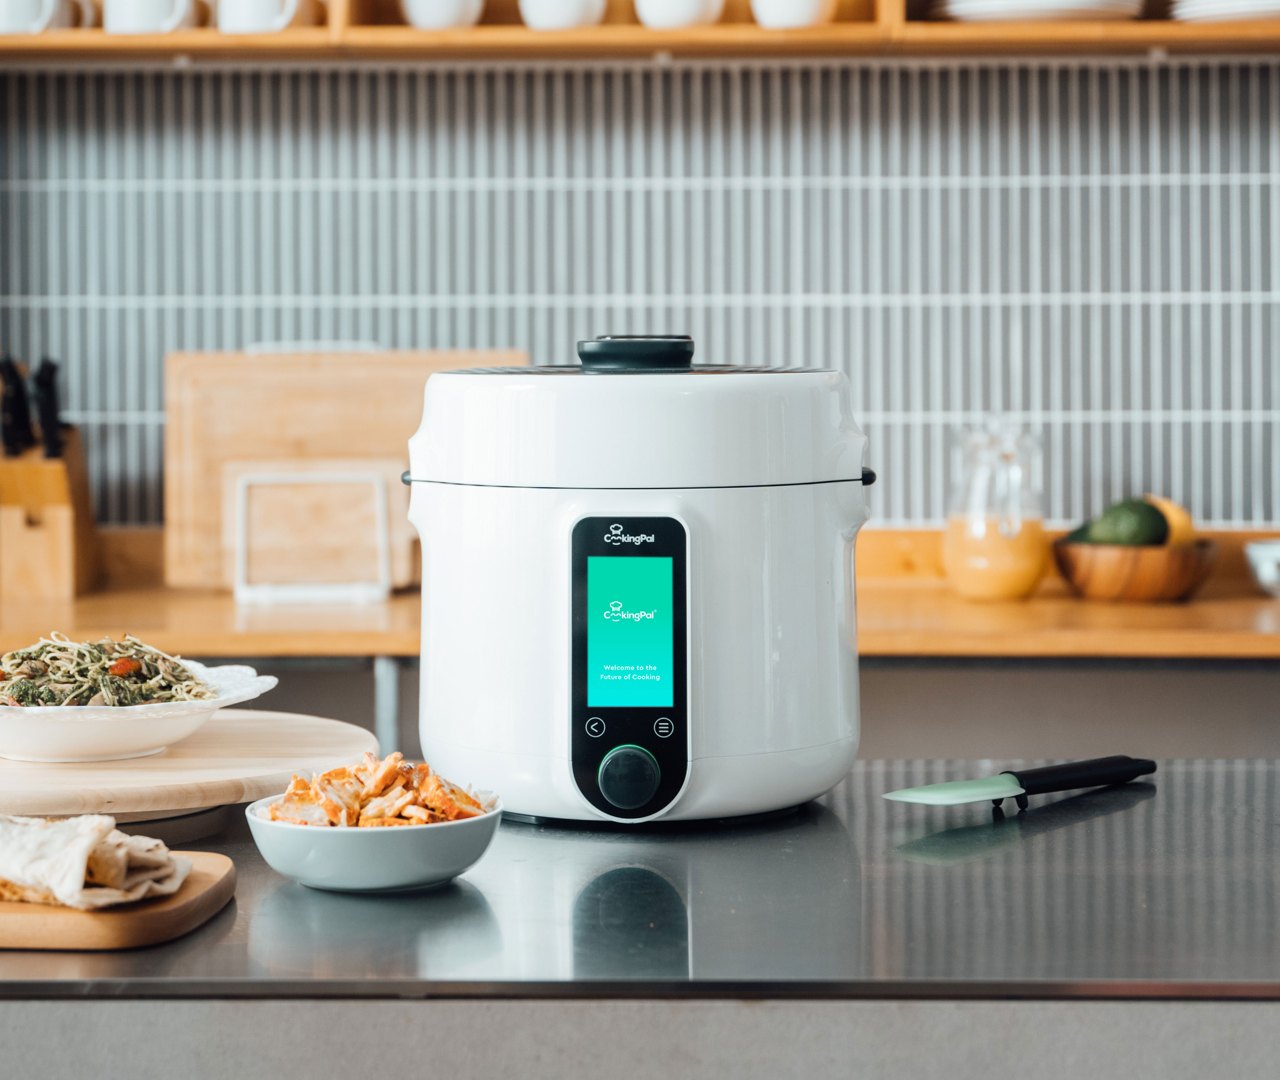 This multifunctional smart cooker turns you into a kitchen wiz